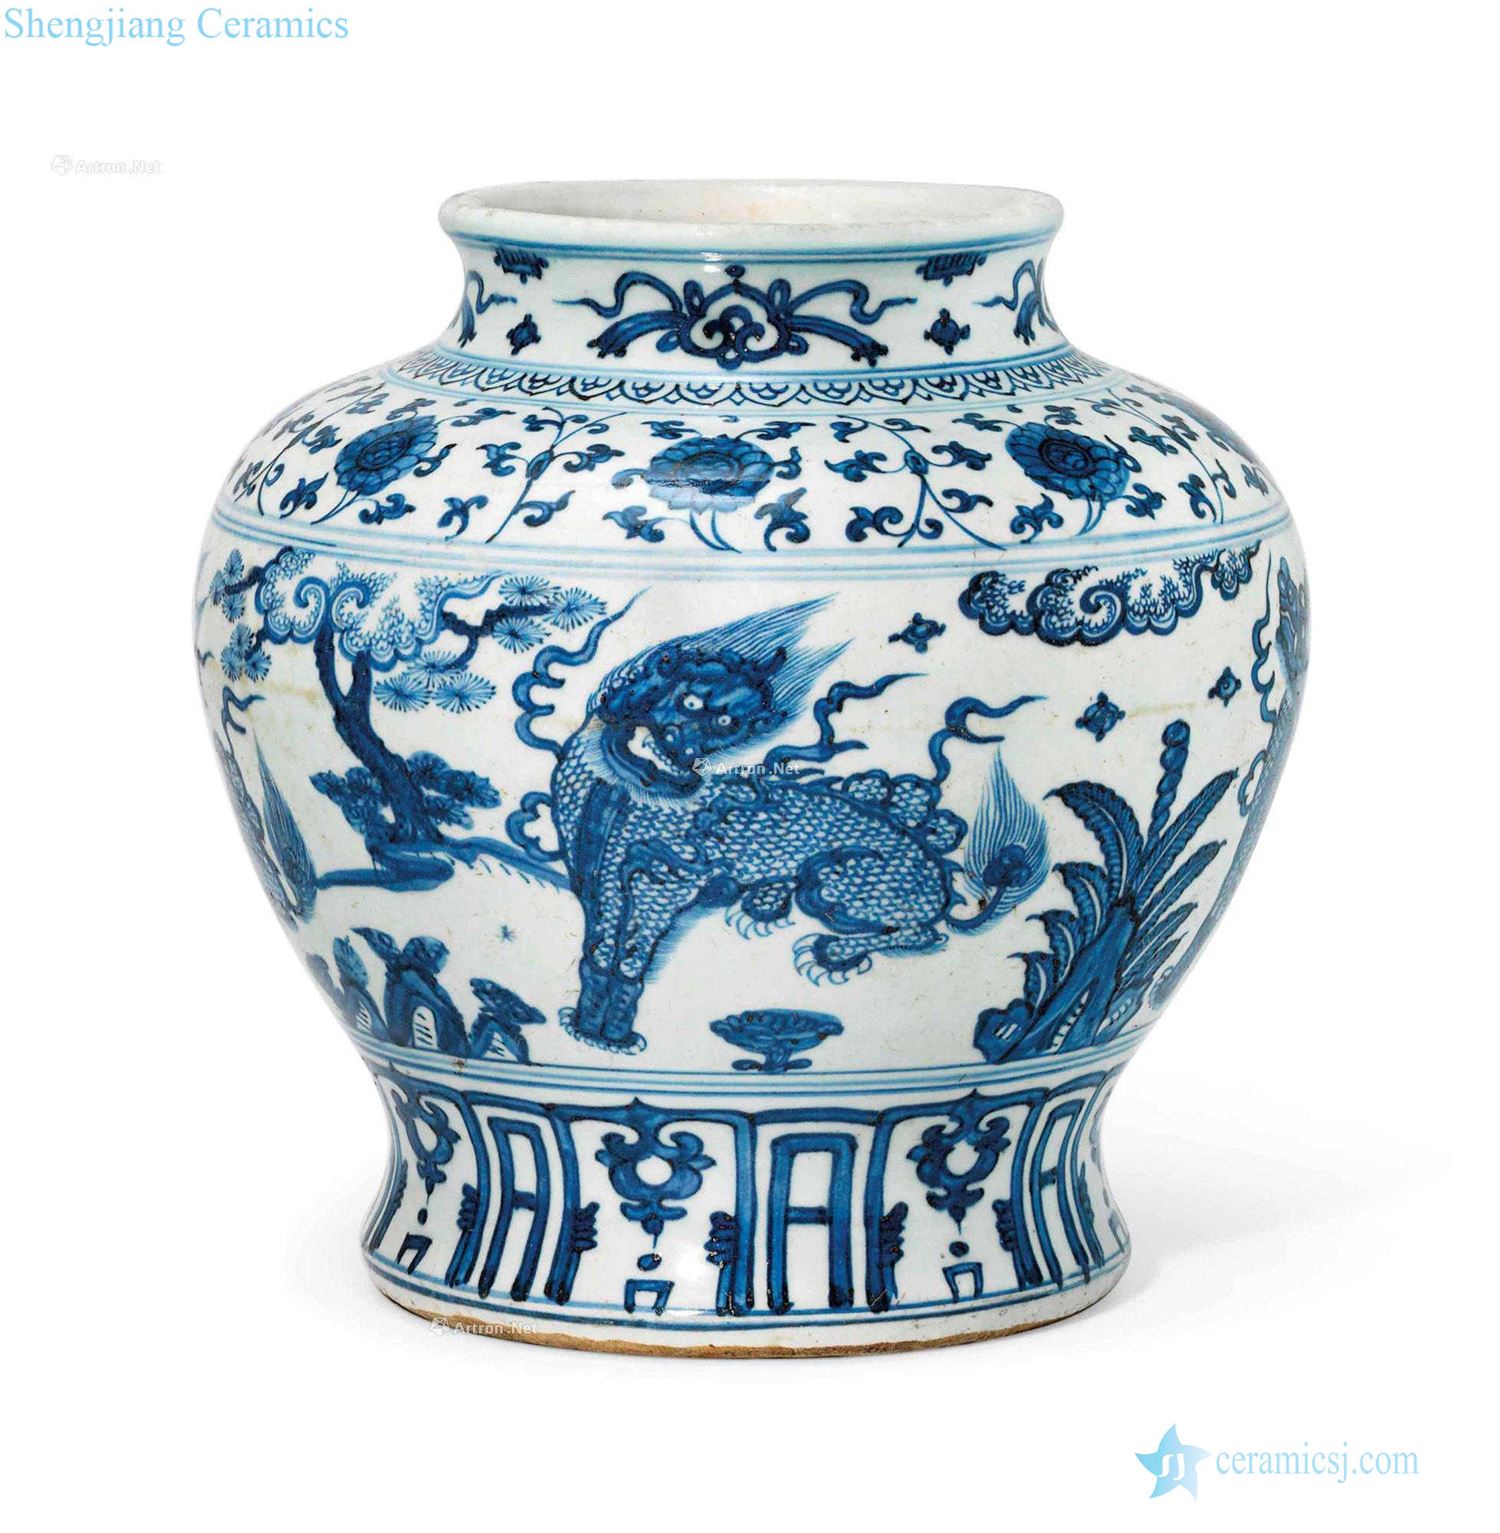 The late Ming dynasty Kylin grain canister